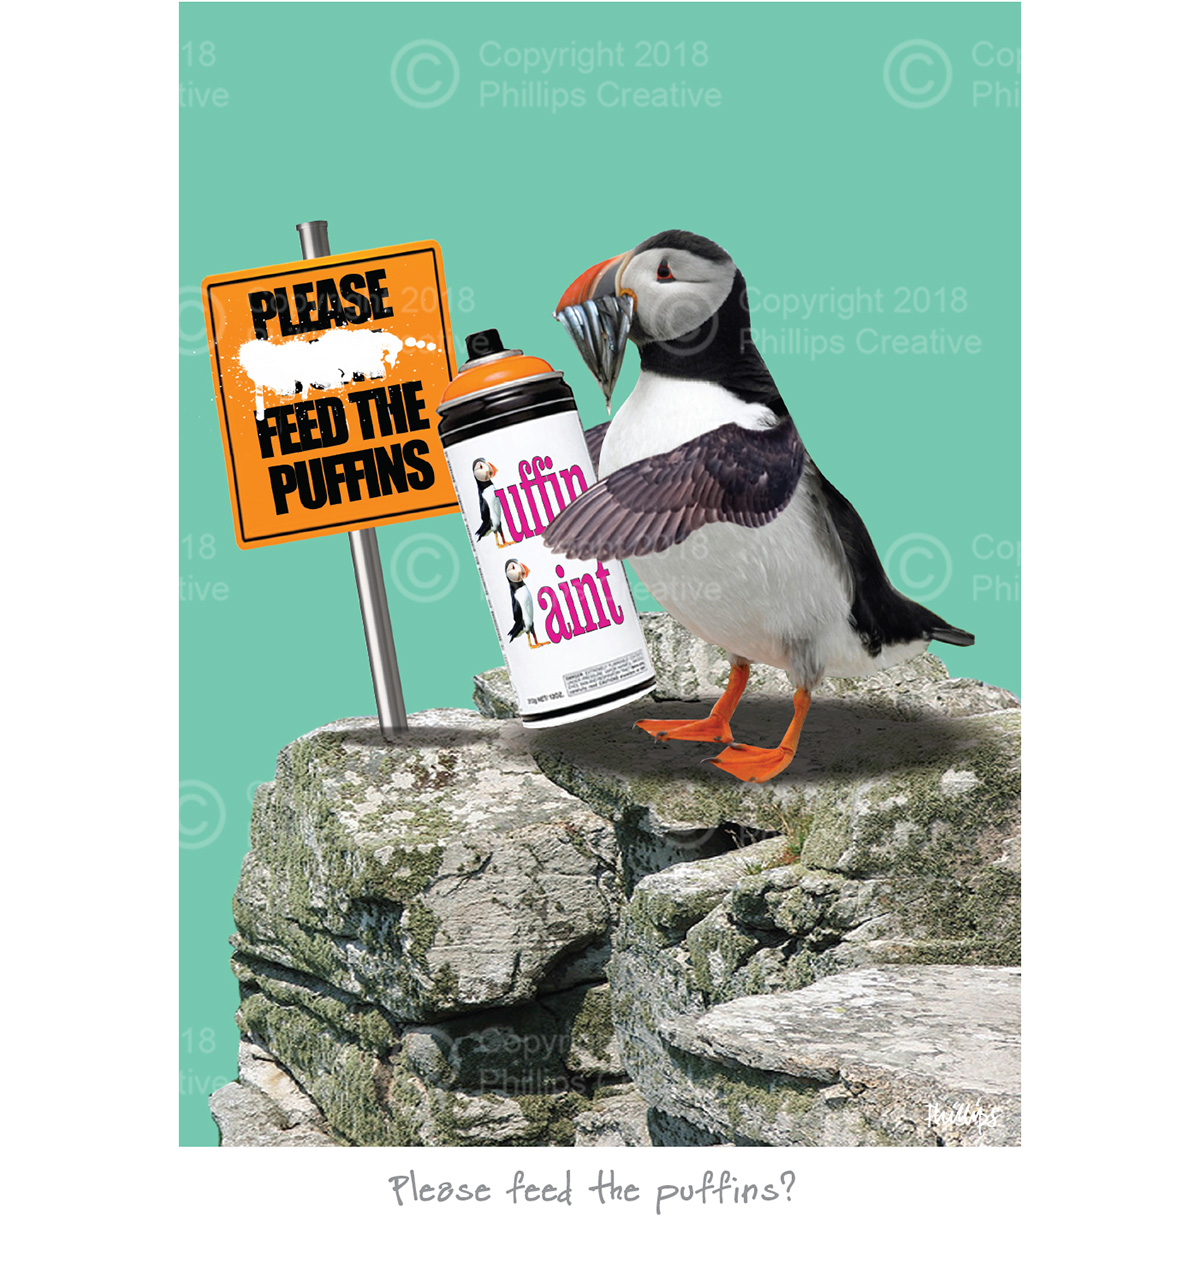 Please feed the Puffins?